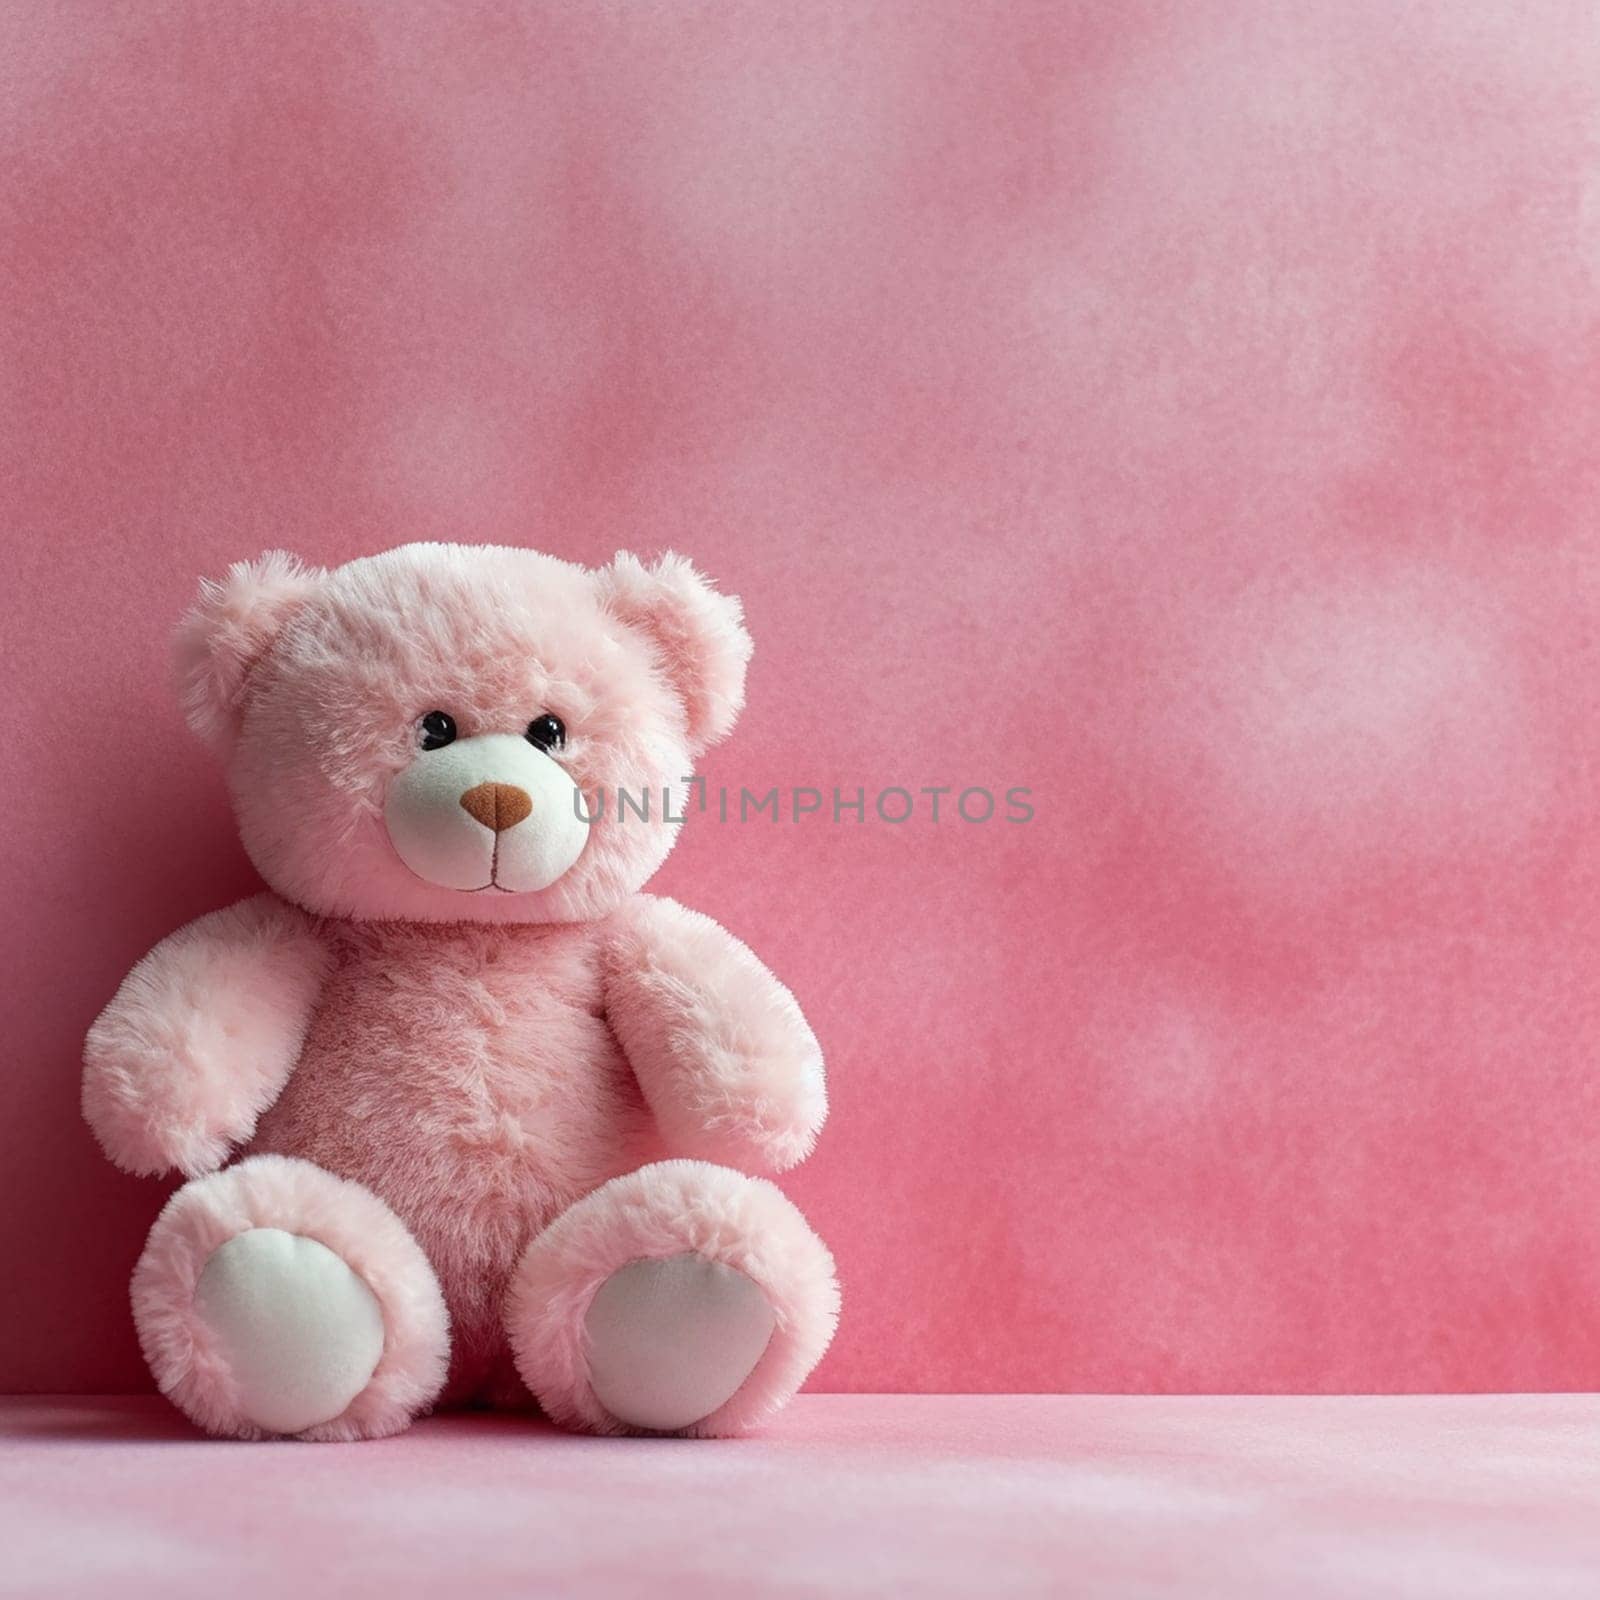 Pink teddy bear sitting against a light pink background.